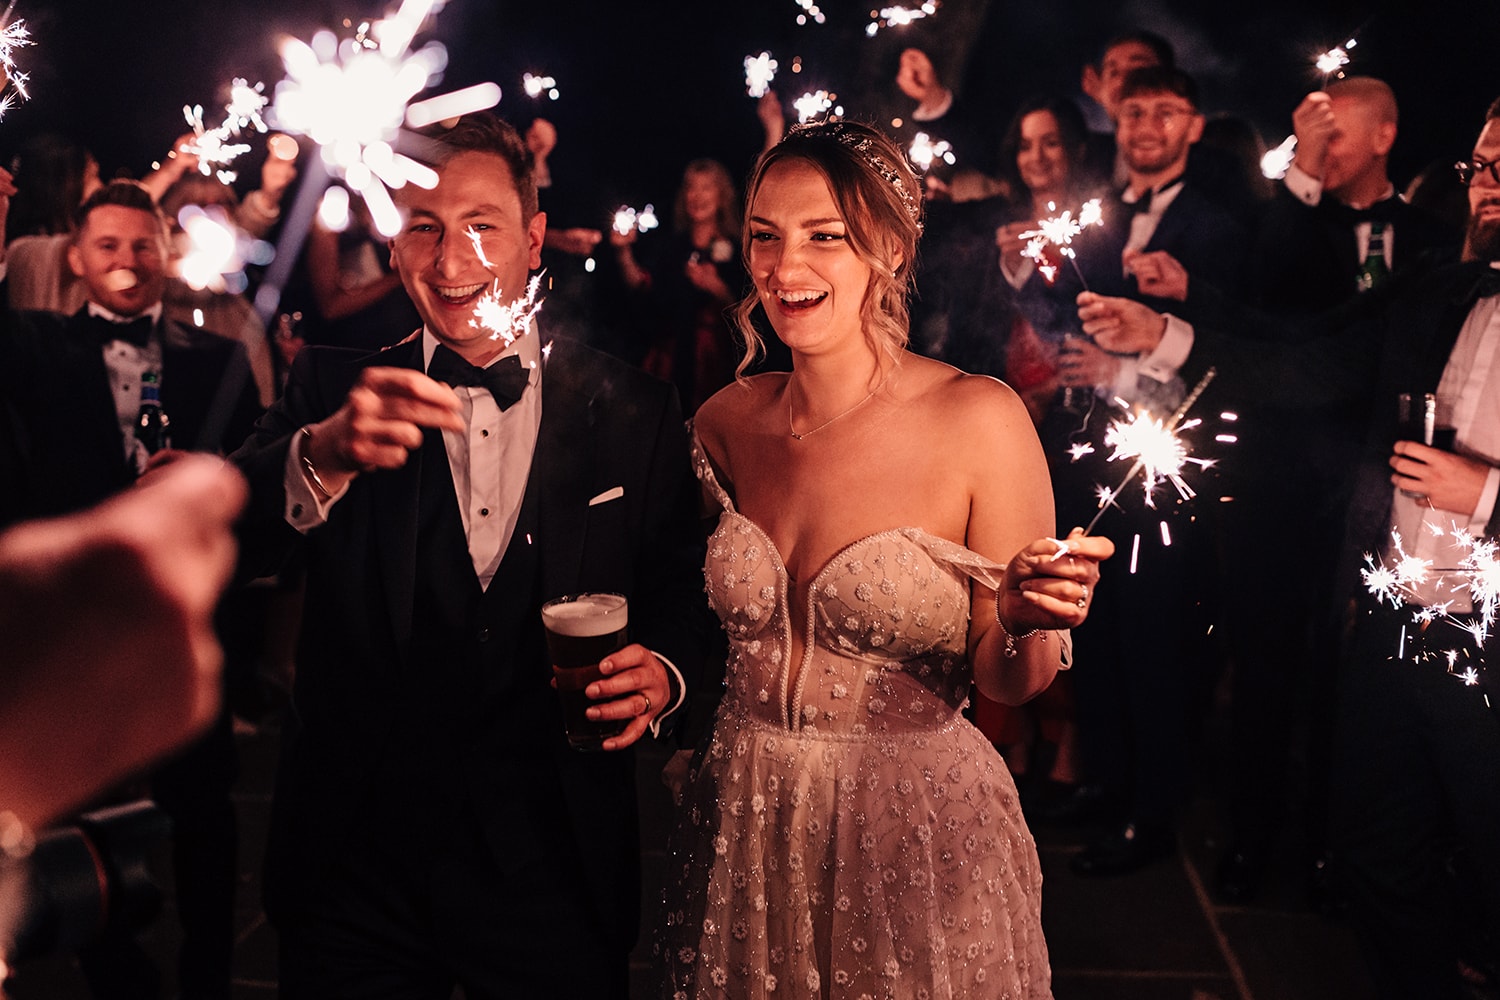 Bride, Groom and guests with sparklers